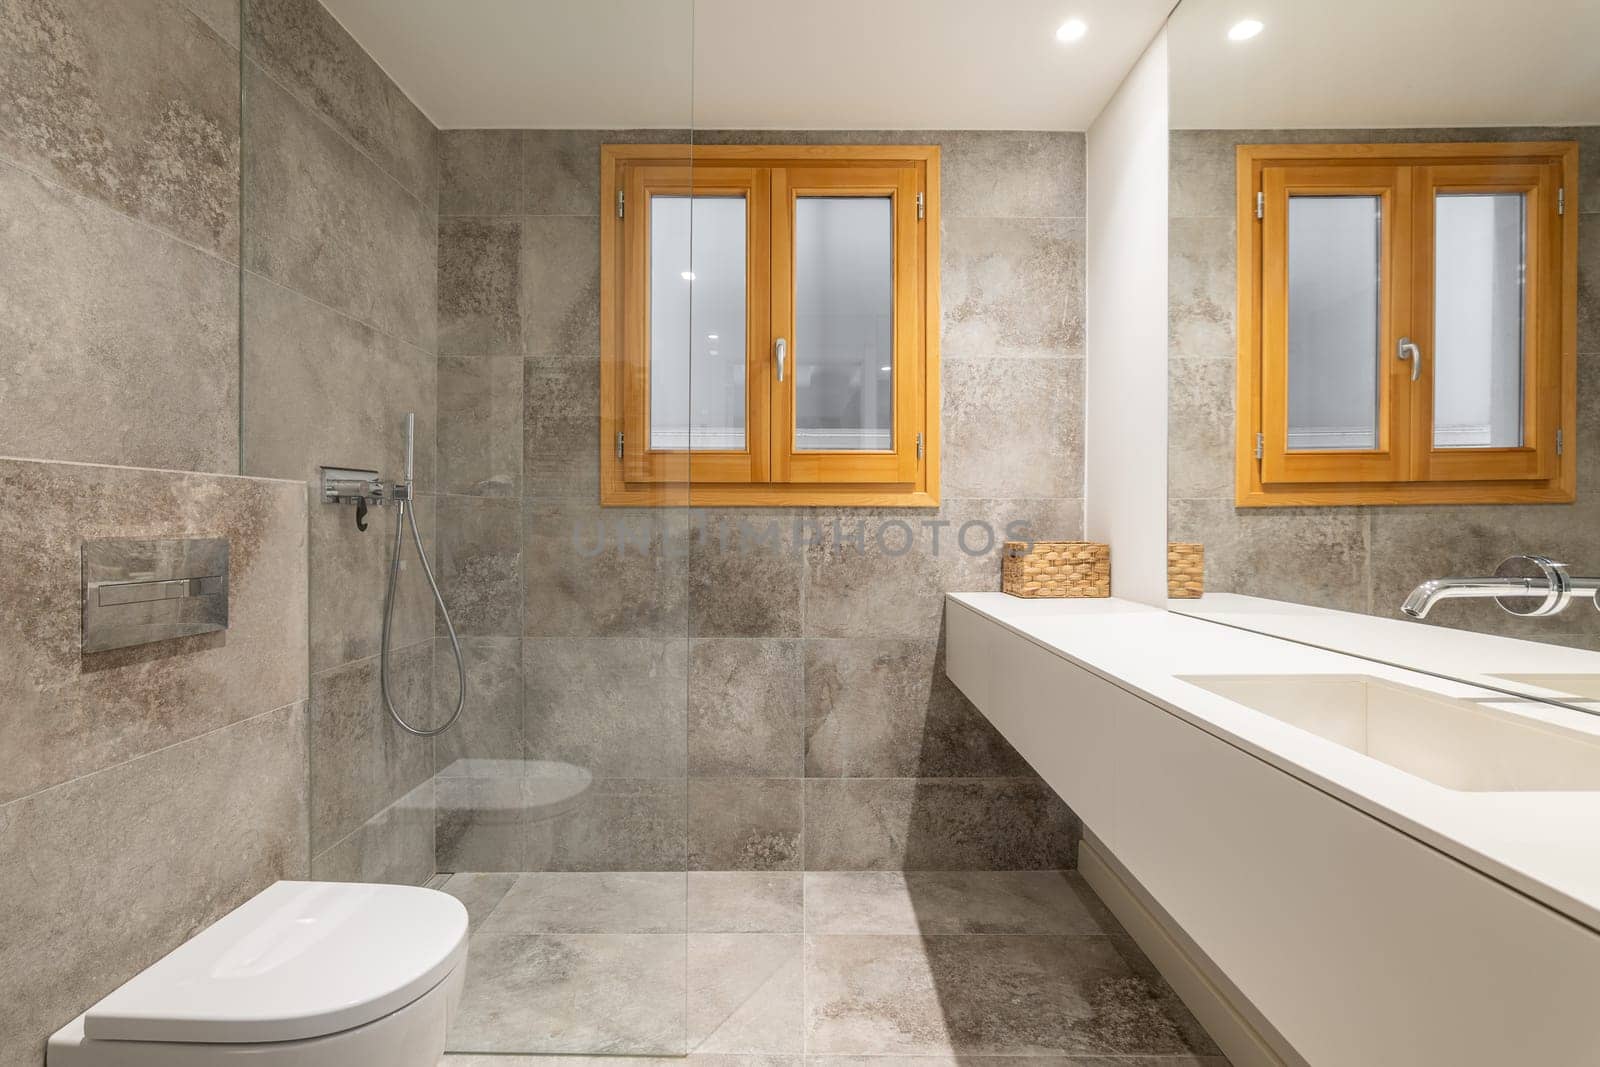 Large bathroom with long vanity unit near washbasin area. Light washing area with expensive tiles and wooden inner window reflect in large mirror